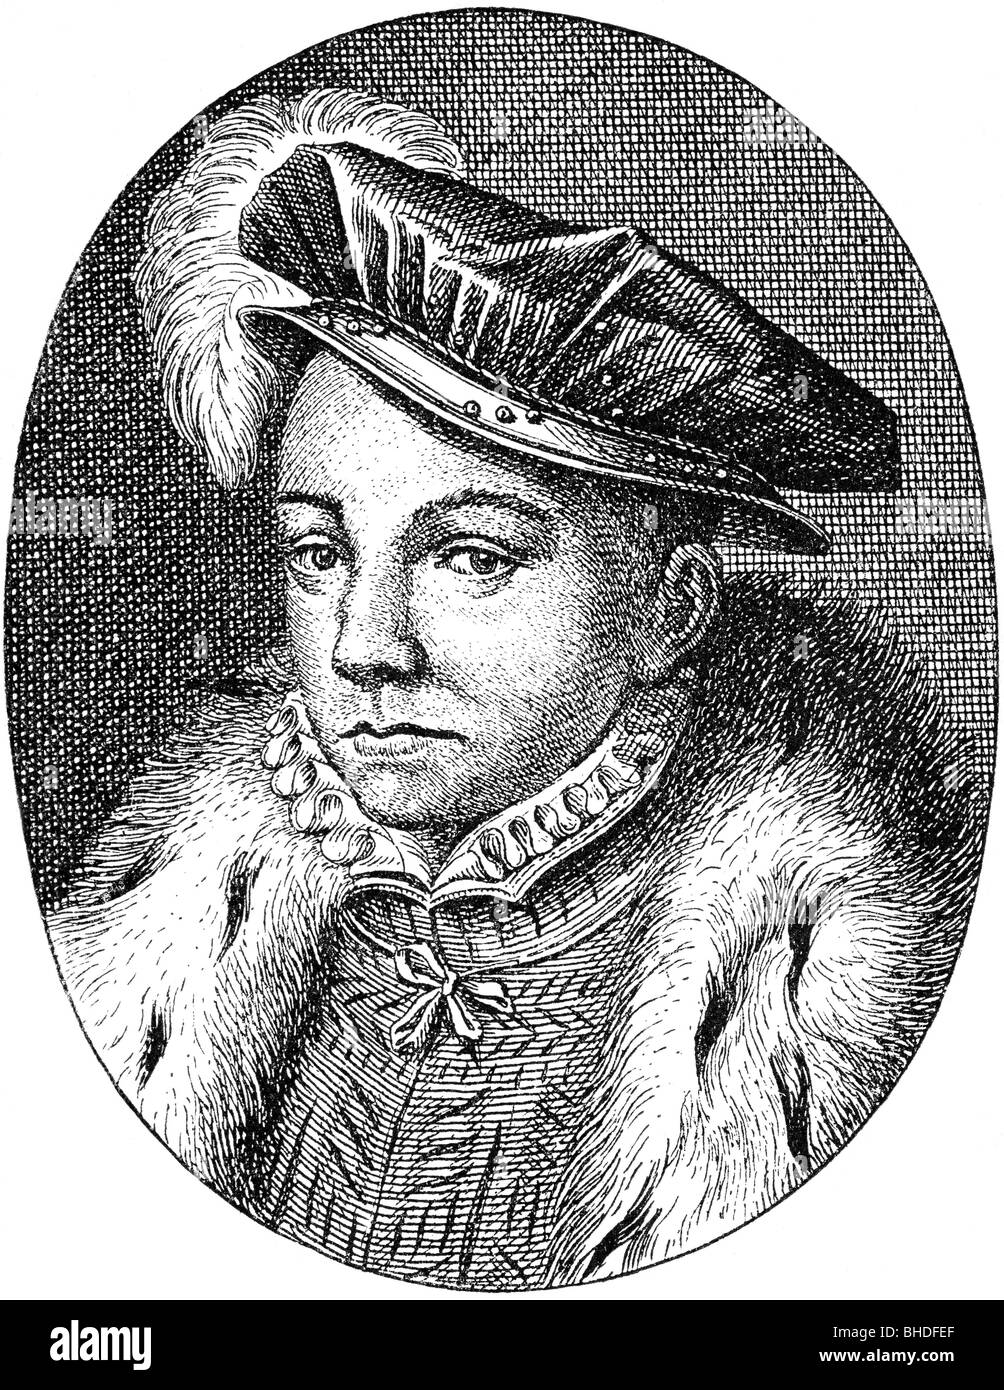 Francis II, 19.1.1544 - 5.12.1560, King of France 10.7.1559 - 5.12.1560, portrait, copper engraving by J. Punt, 16th century, , Artist's Copyright has not to be cleared Stock Photo